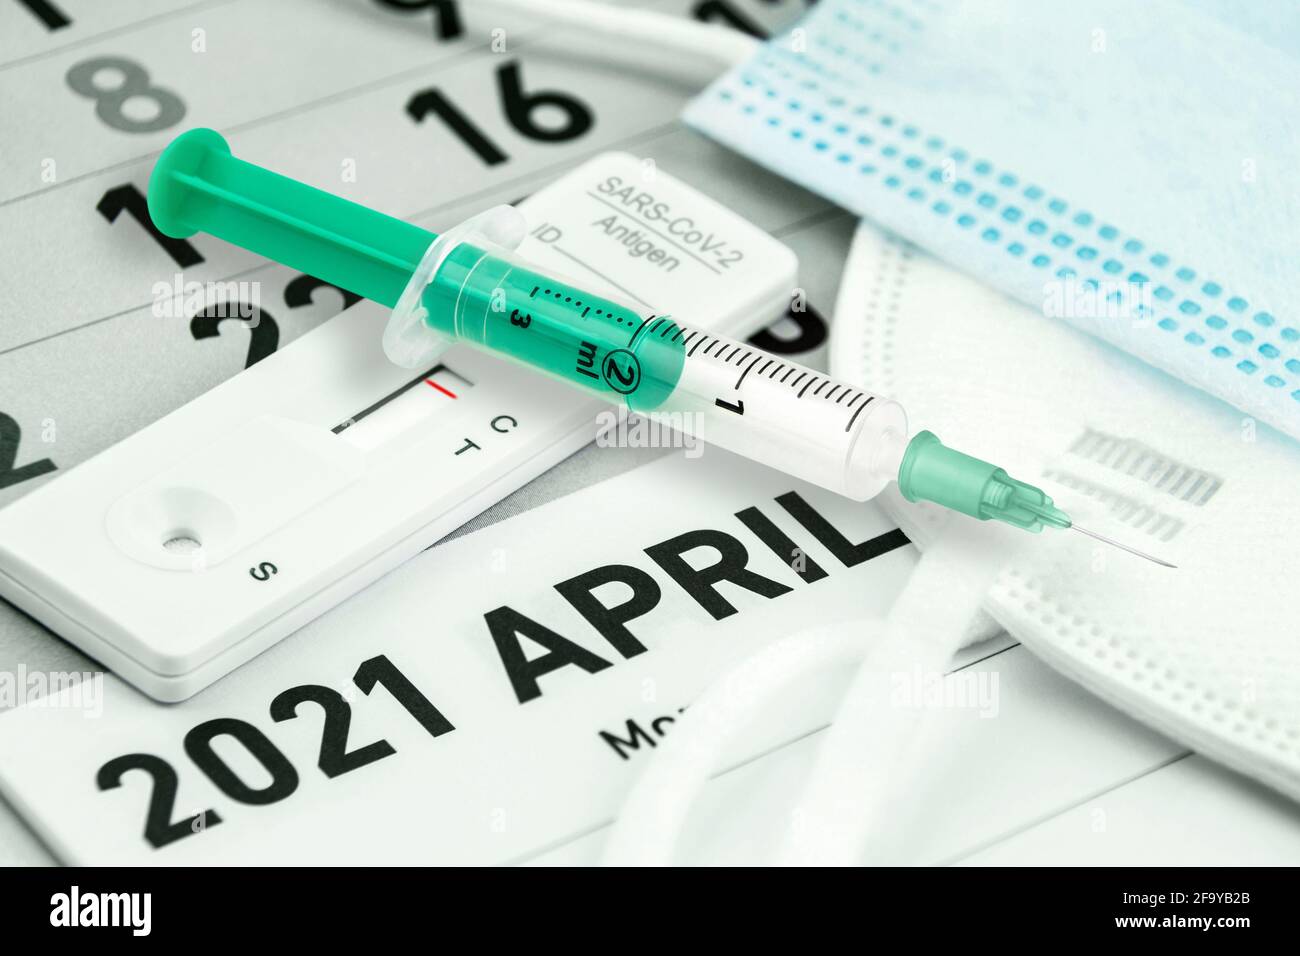 Corona concept Vaccination, Rapid Test and masks April 2021 Stock Photo